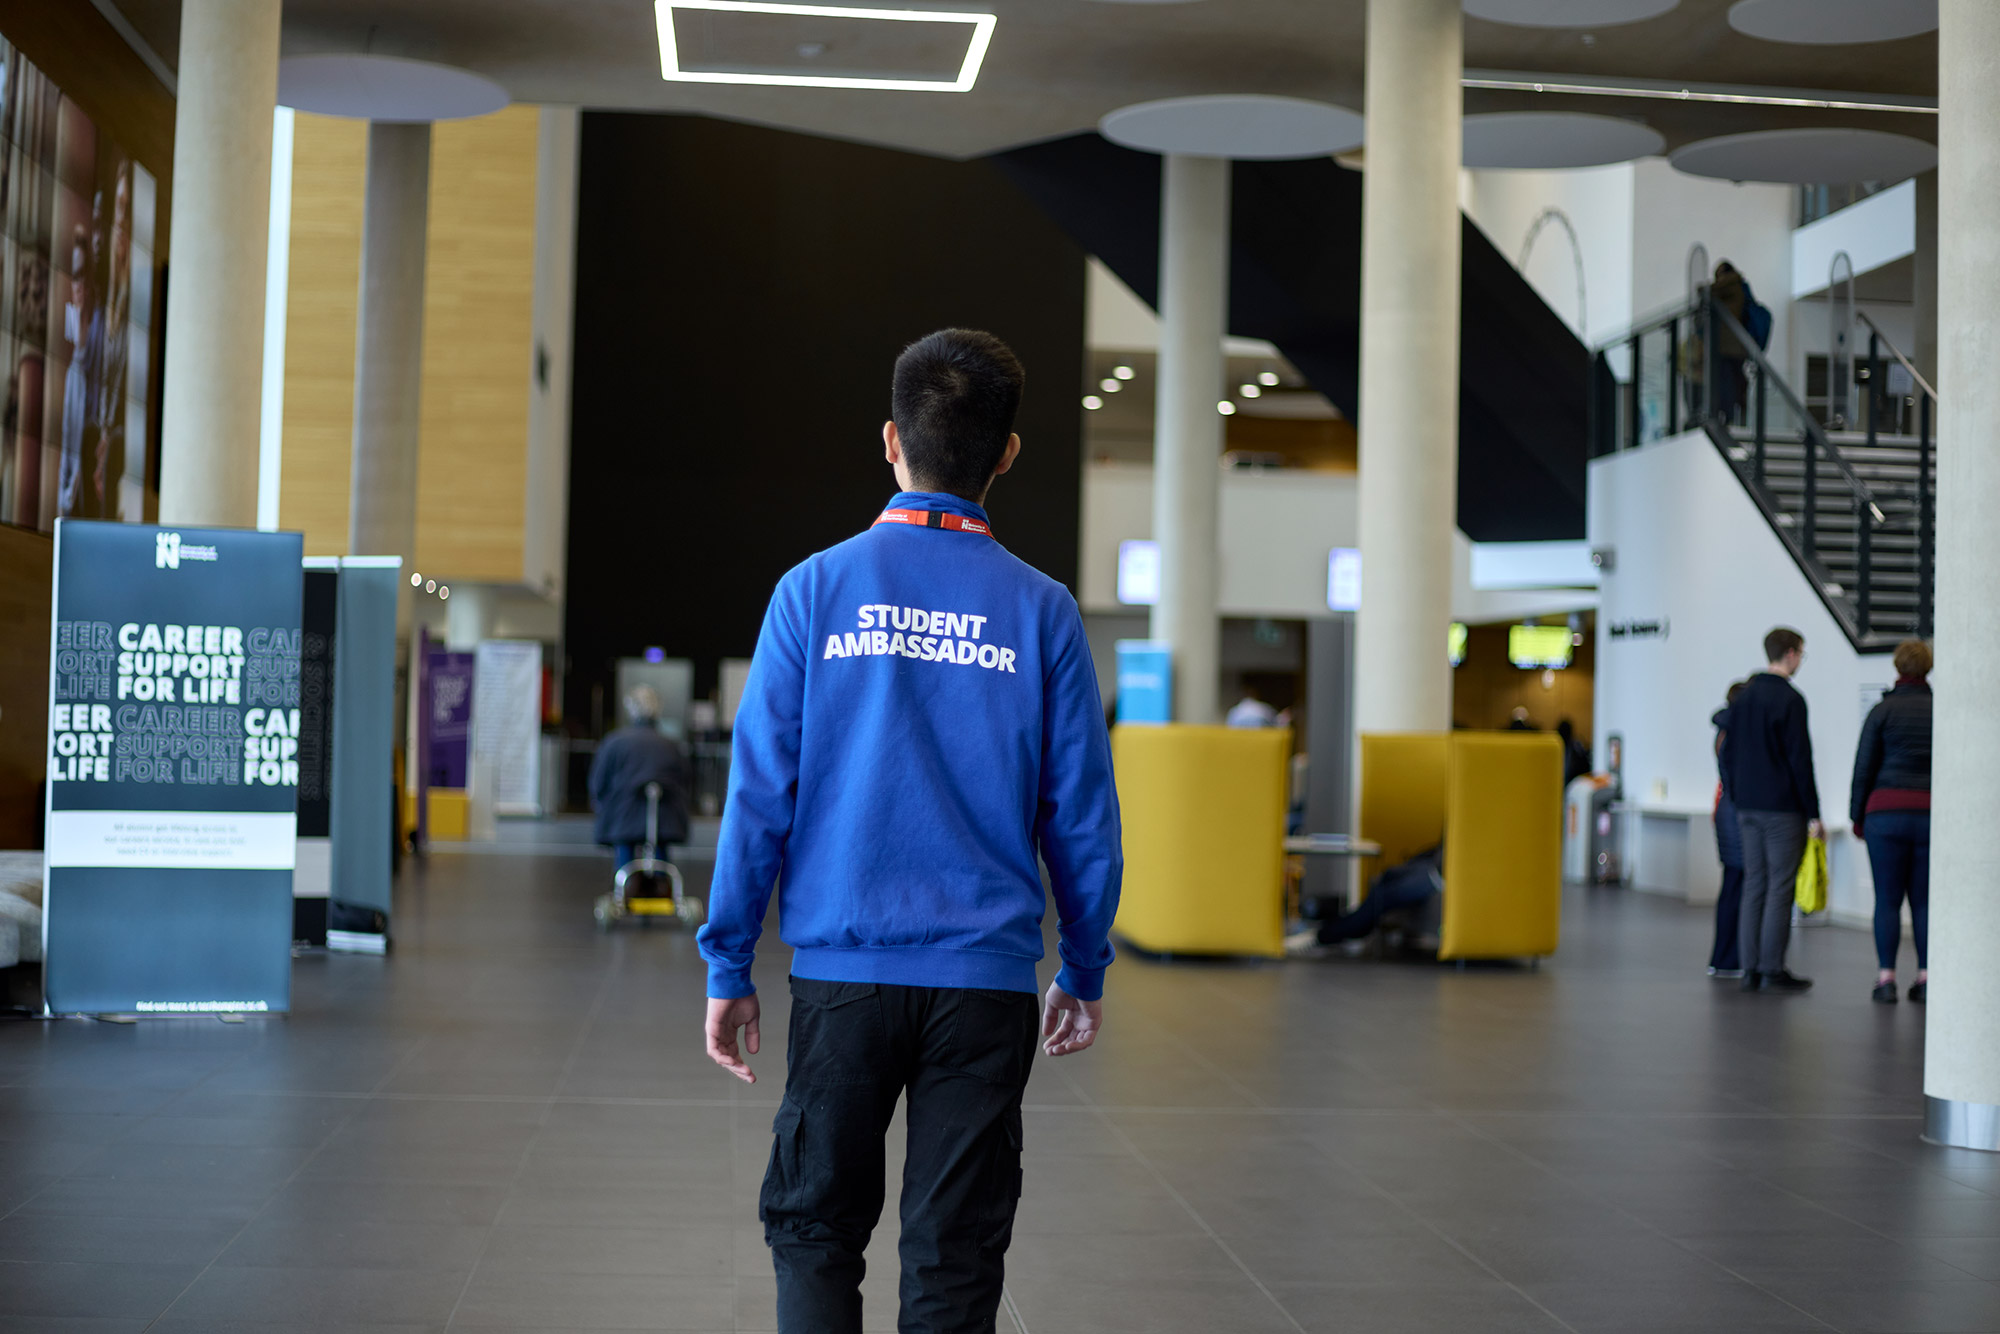 Student Ambassador walking away from the camera, on the ground floor of the Learning Hub. Their blue fleece uniform has 'student ambassador' as text on the back. There are signs around including 'career support for life' around, indicating that it is an open day.